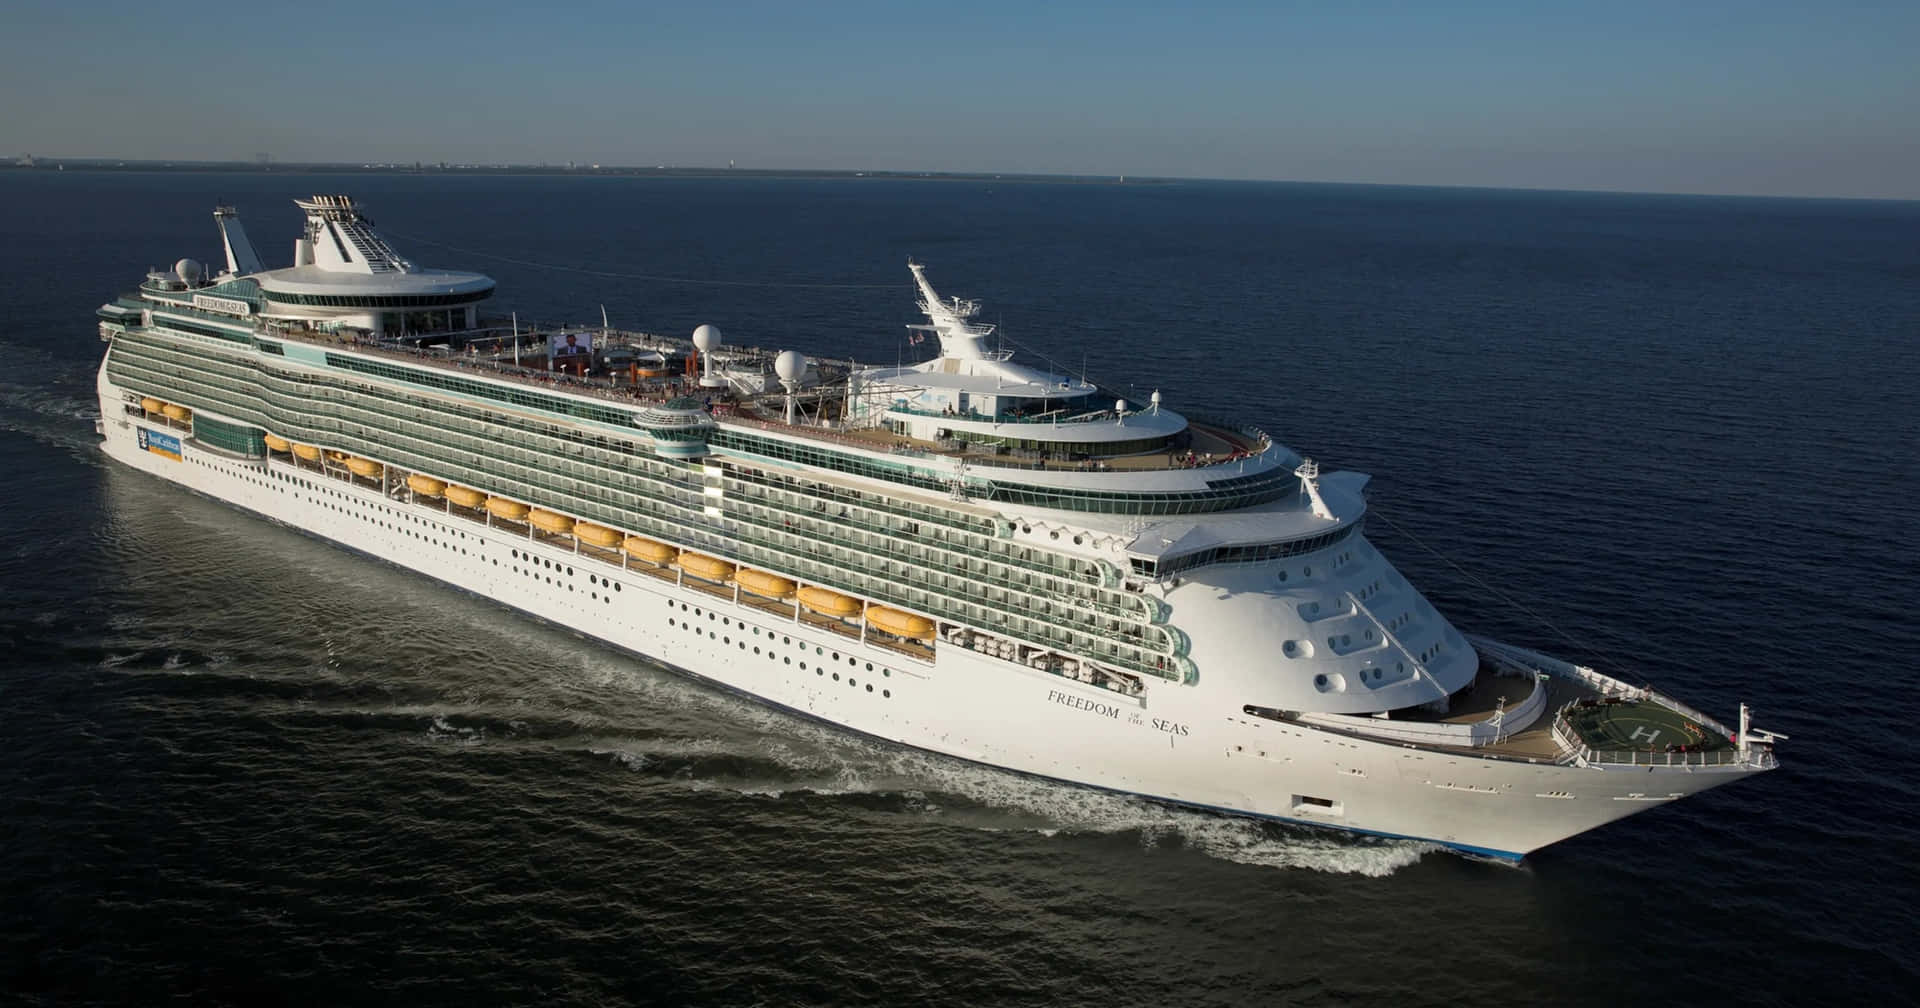 A majestic cruise ship with two pools and a variety of amenities to explore